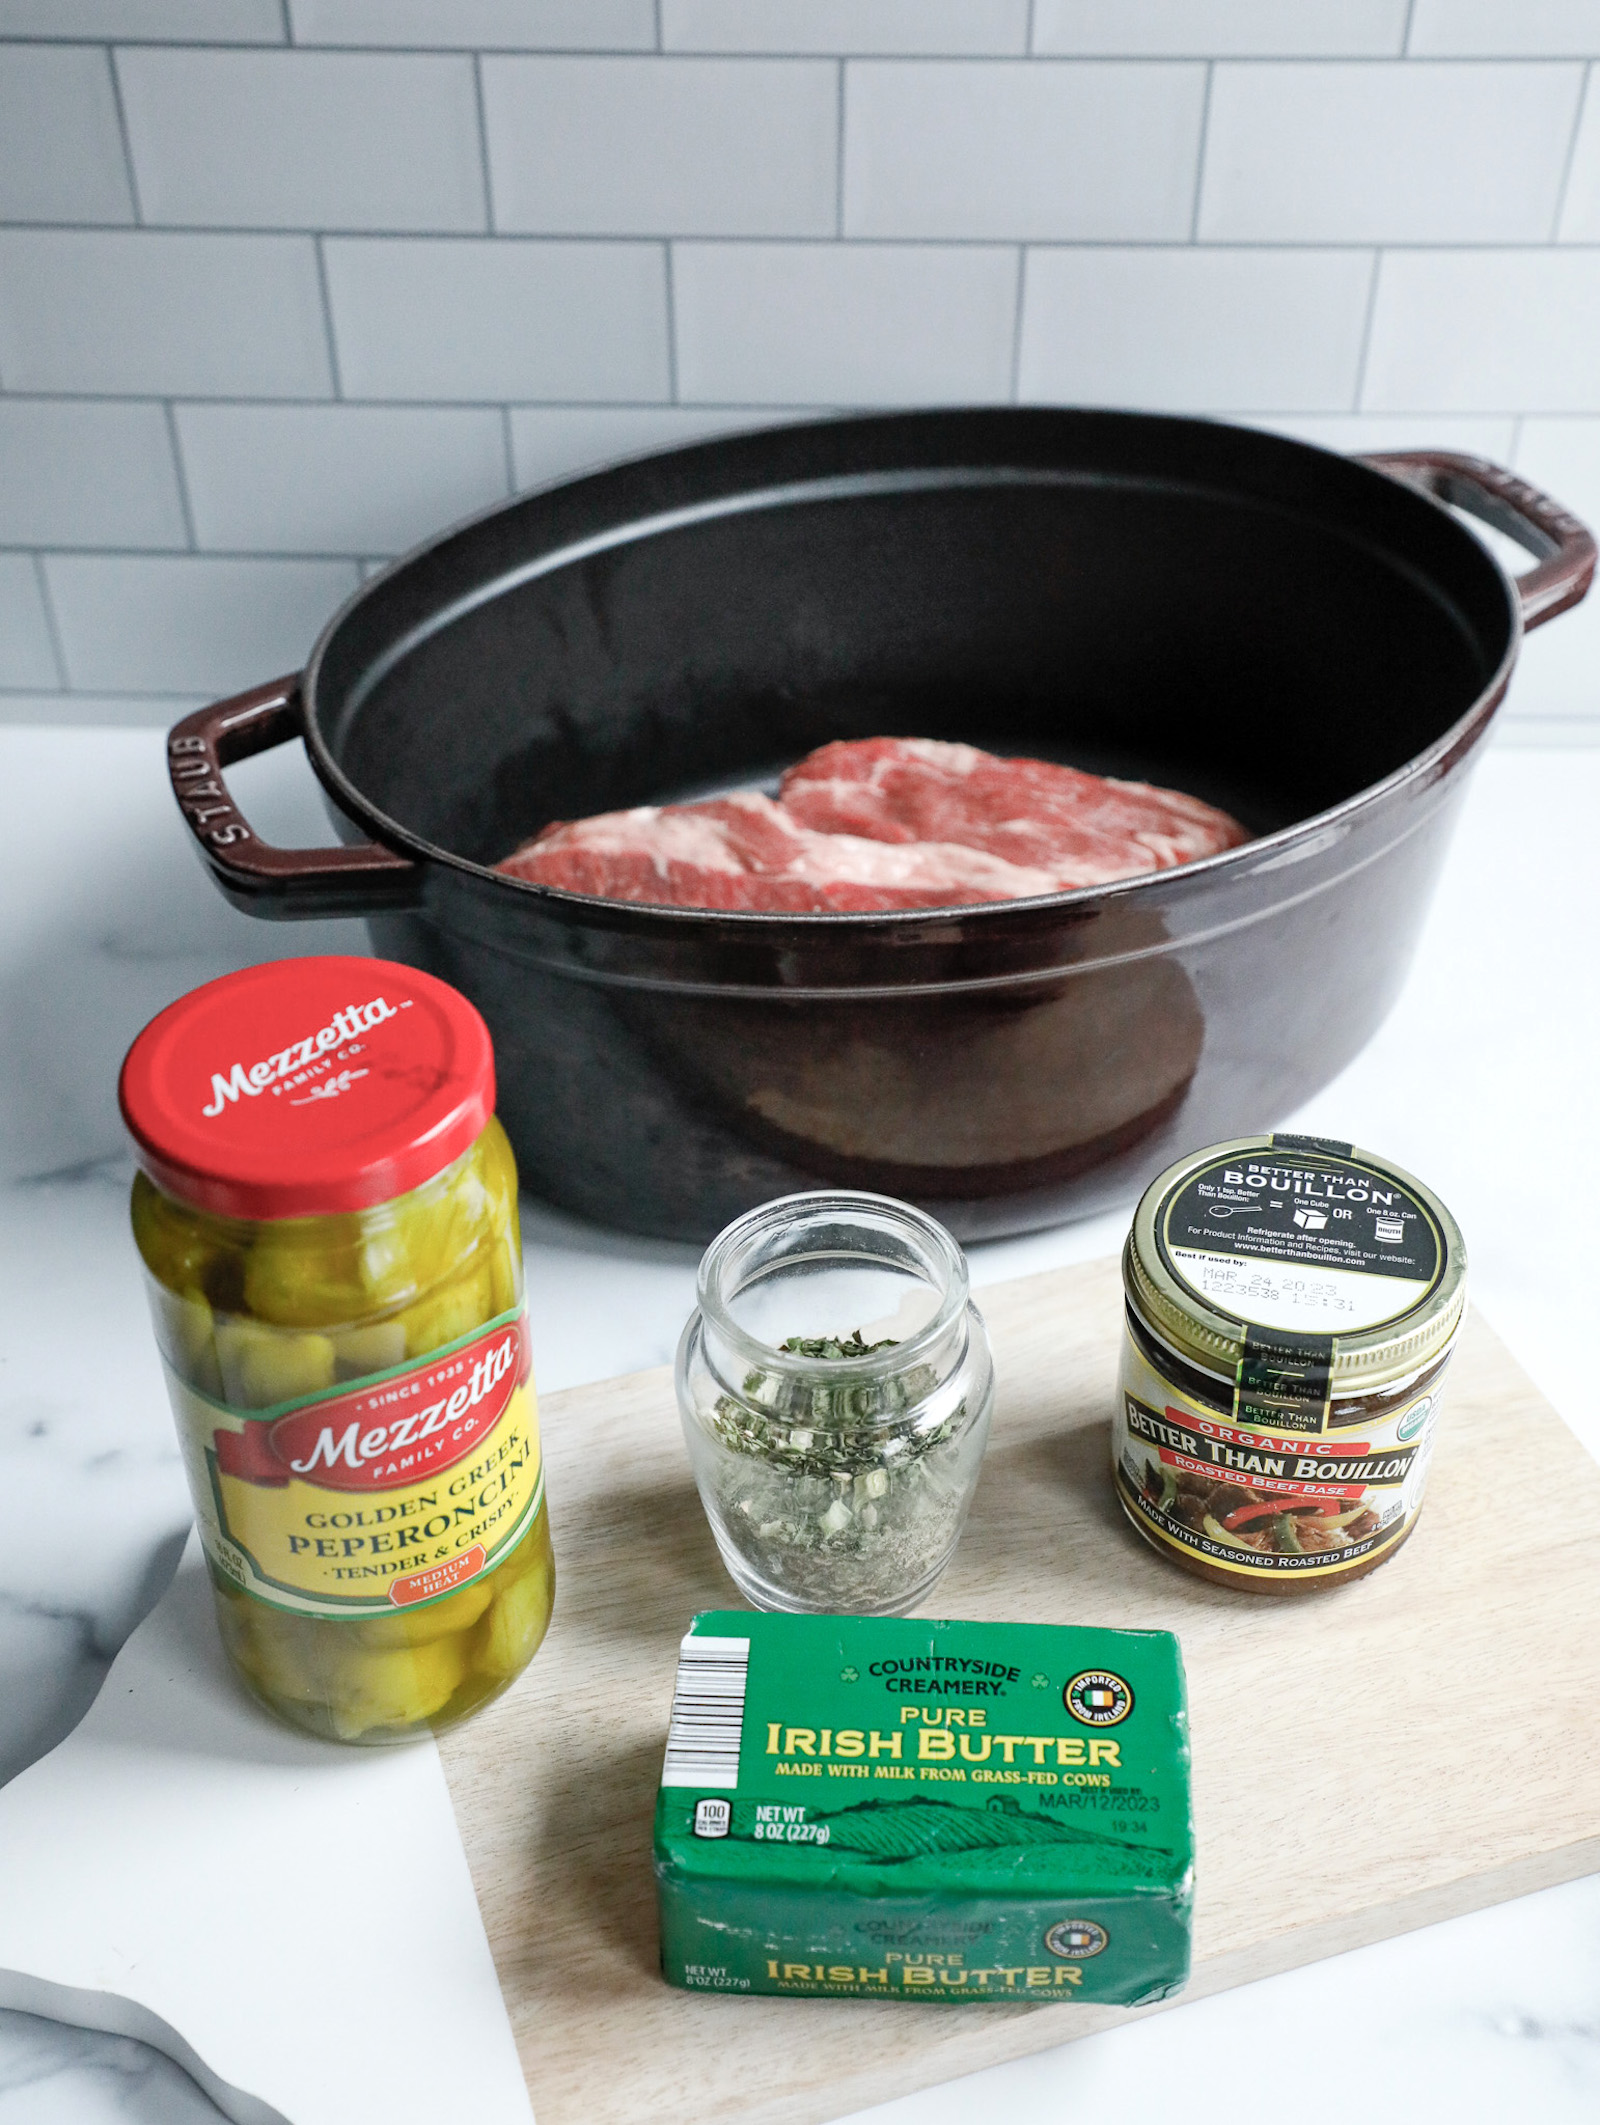 Mississippi Pot Roast Ingredients shown on a cutting board with a white subway tile backsplash in the background